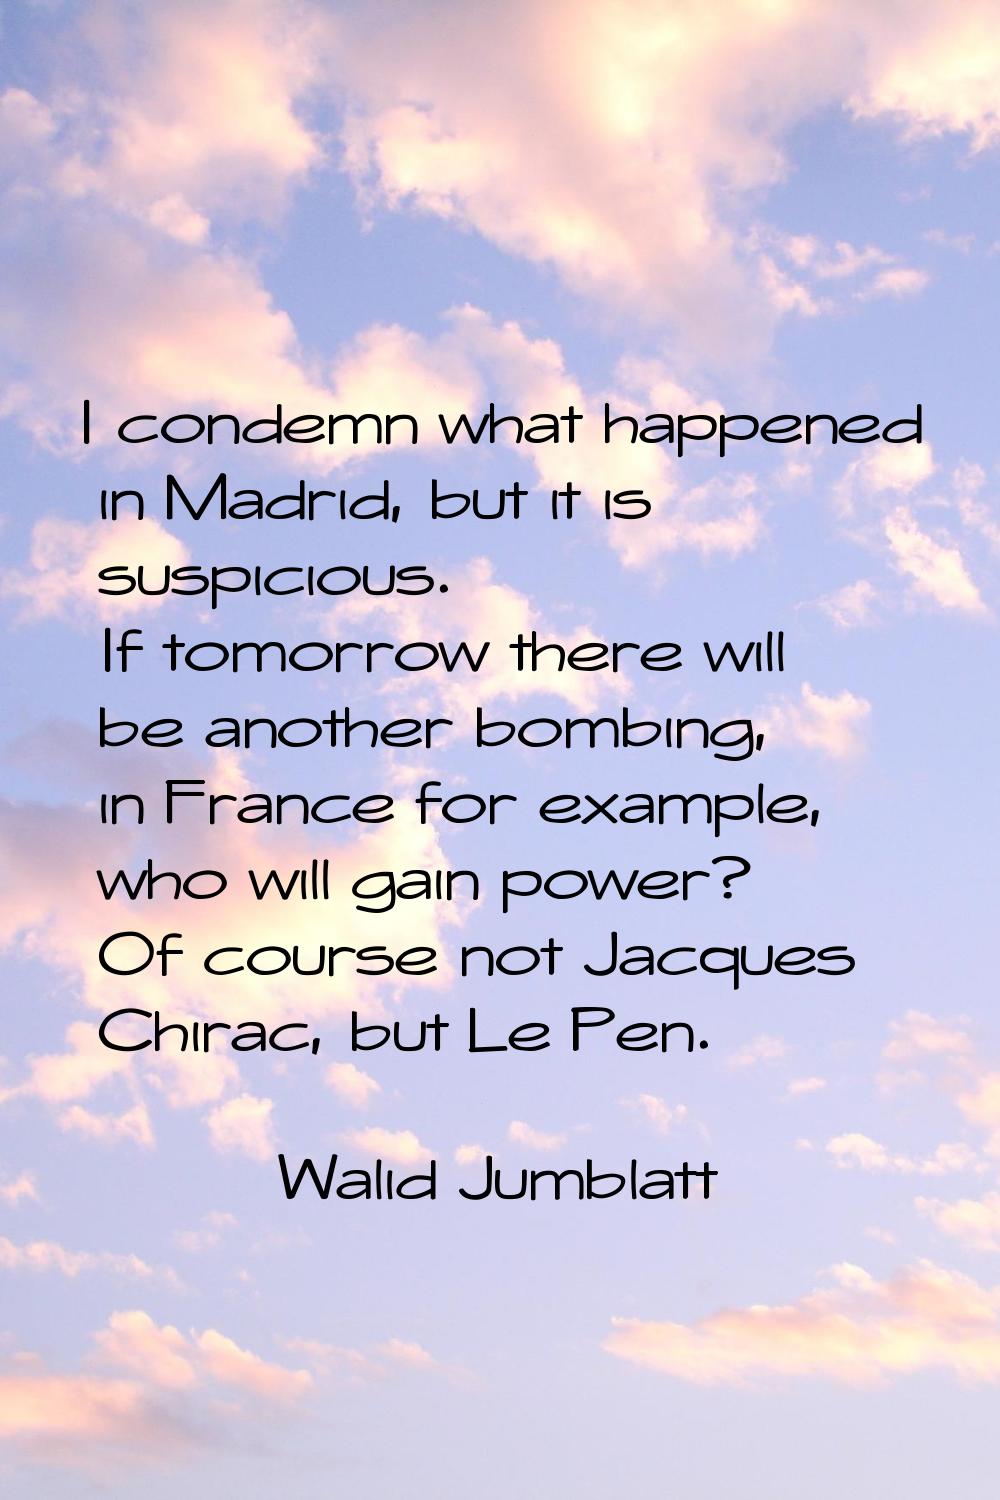 I condemn what happened in Madrid, but it is suspicious. If tomorrow there will be another bombing,